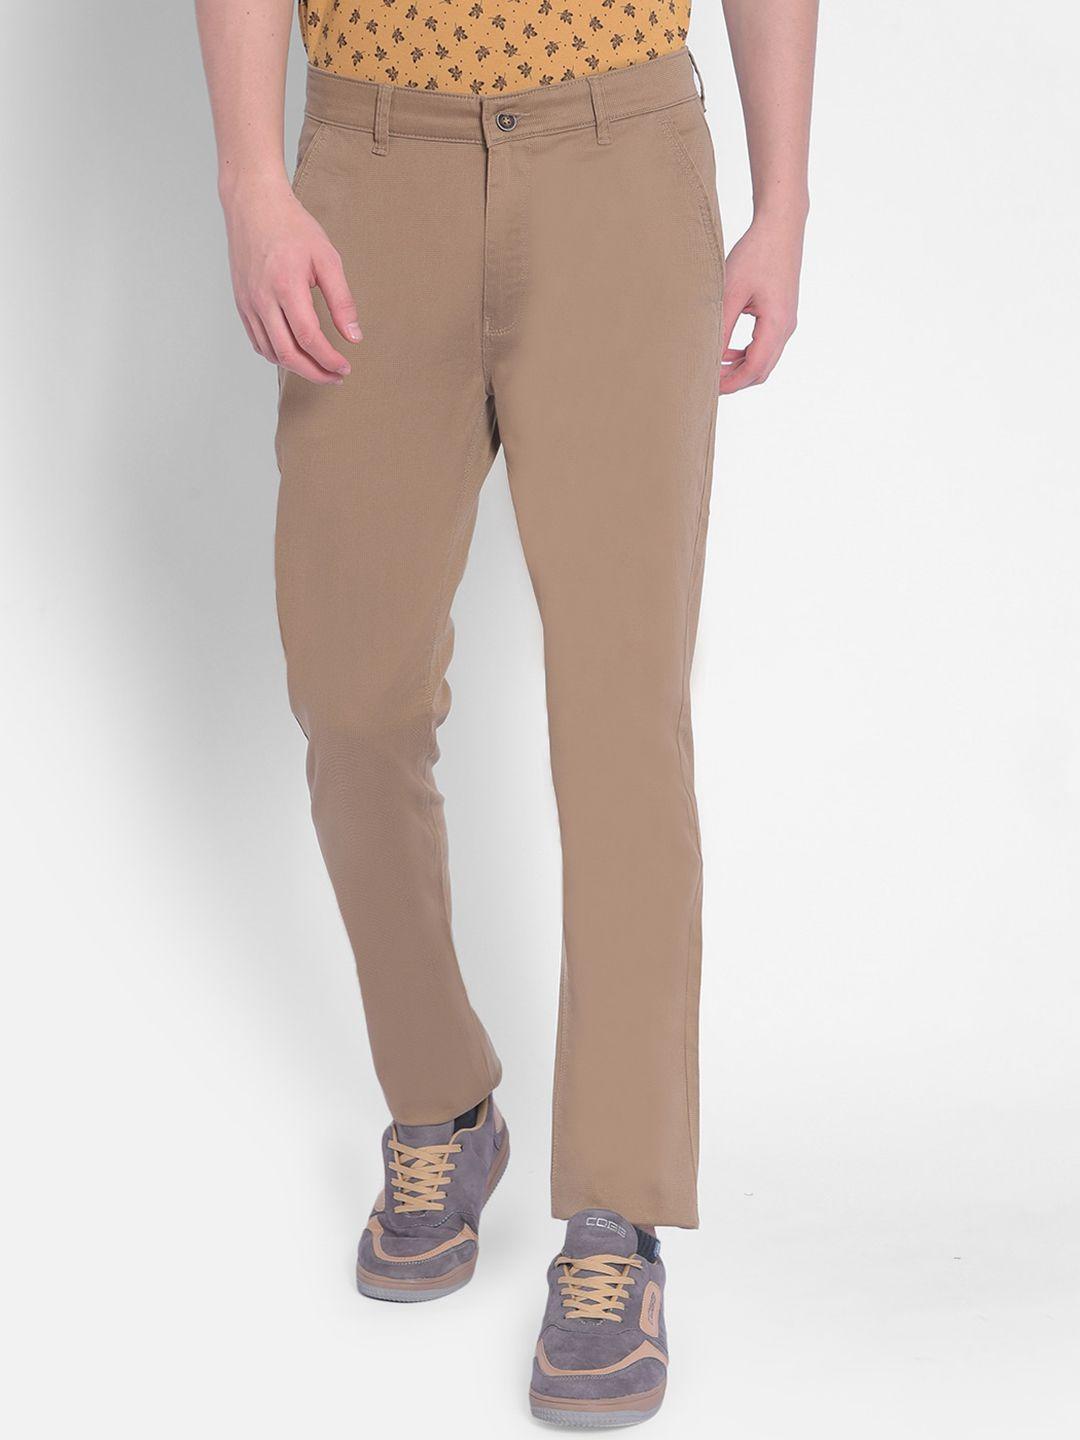 crimsoune-club-men-mid-rise-abstract-printed-slim-fit-chinos-trousers